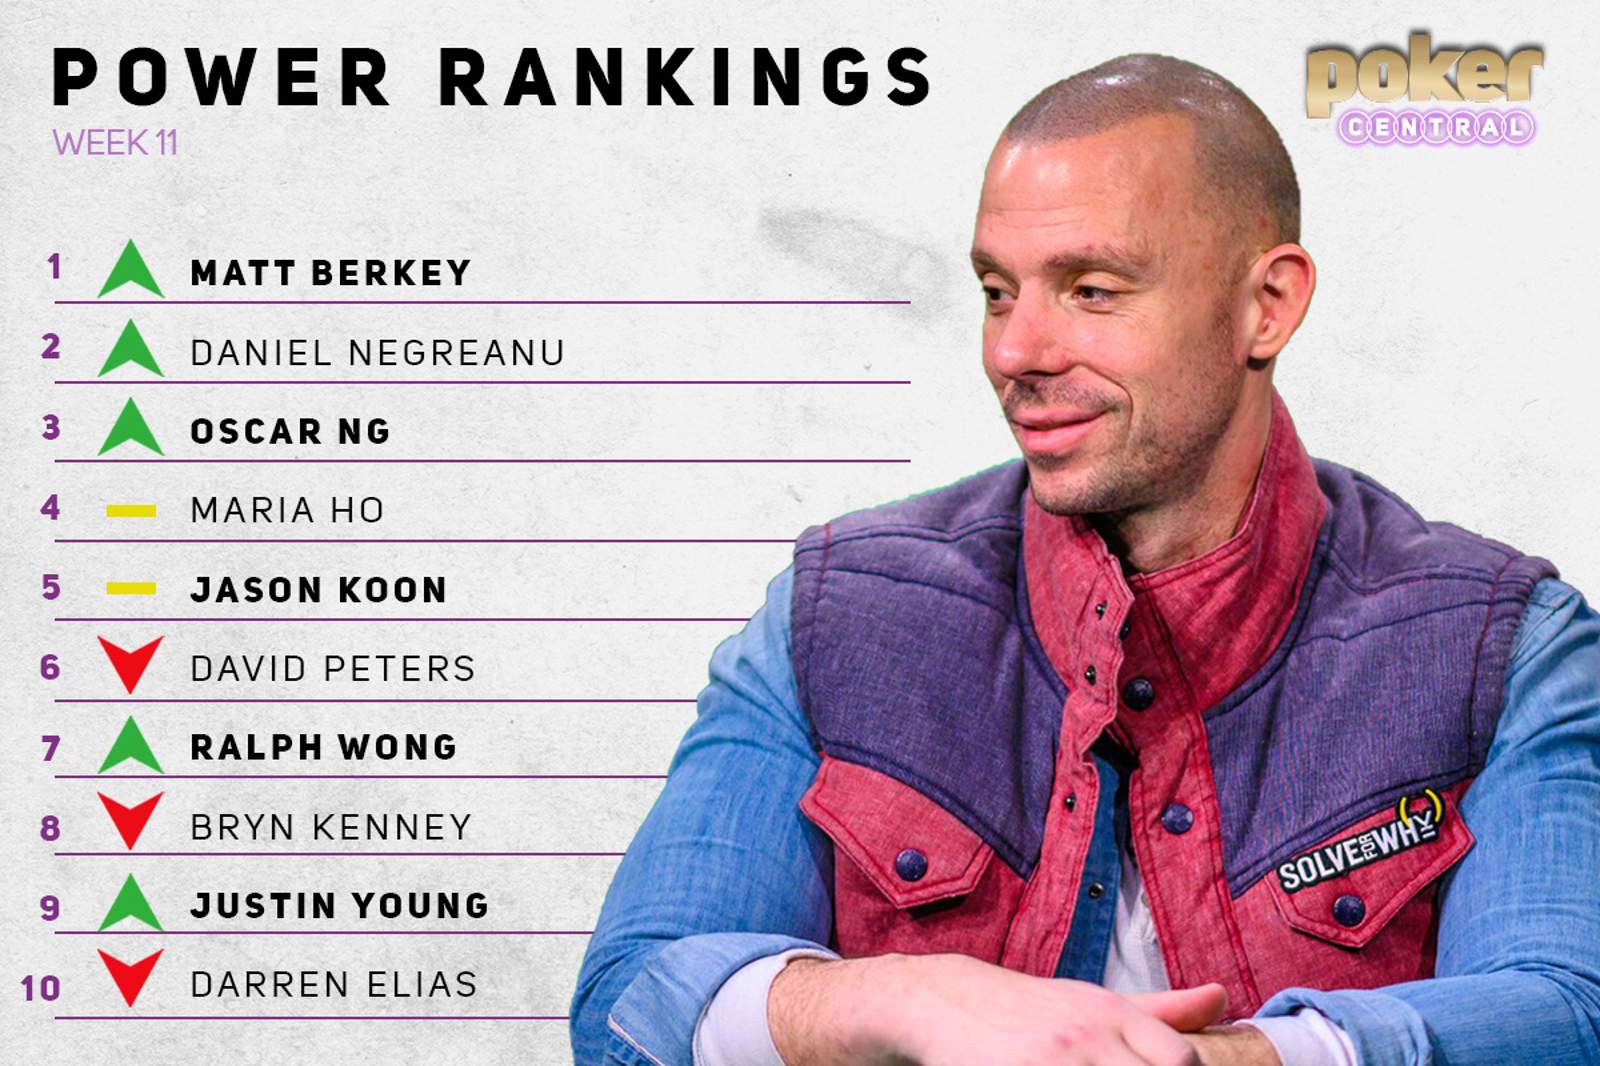 Power Rankings: Super High Roller Cash Game Shifts Thing Up: Berkey, Negreanu and Oscar Up Top